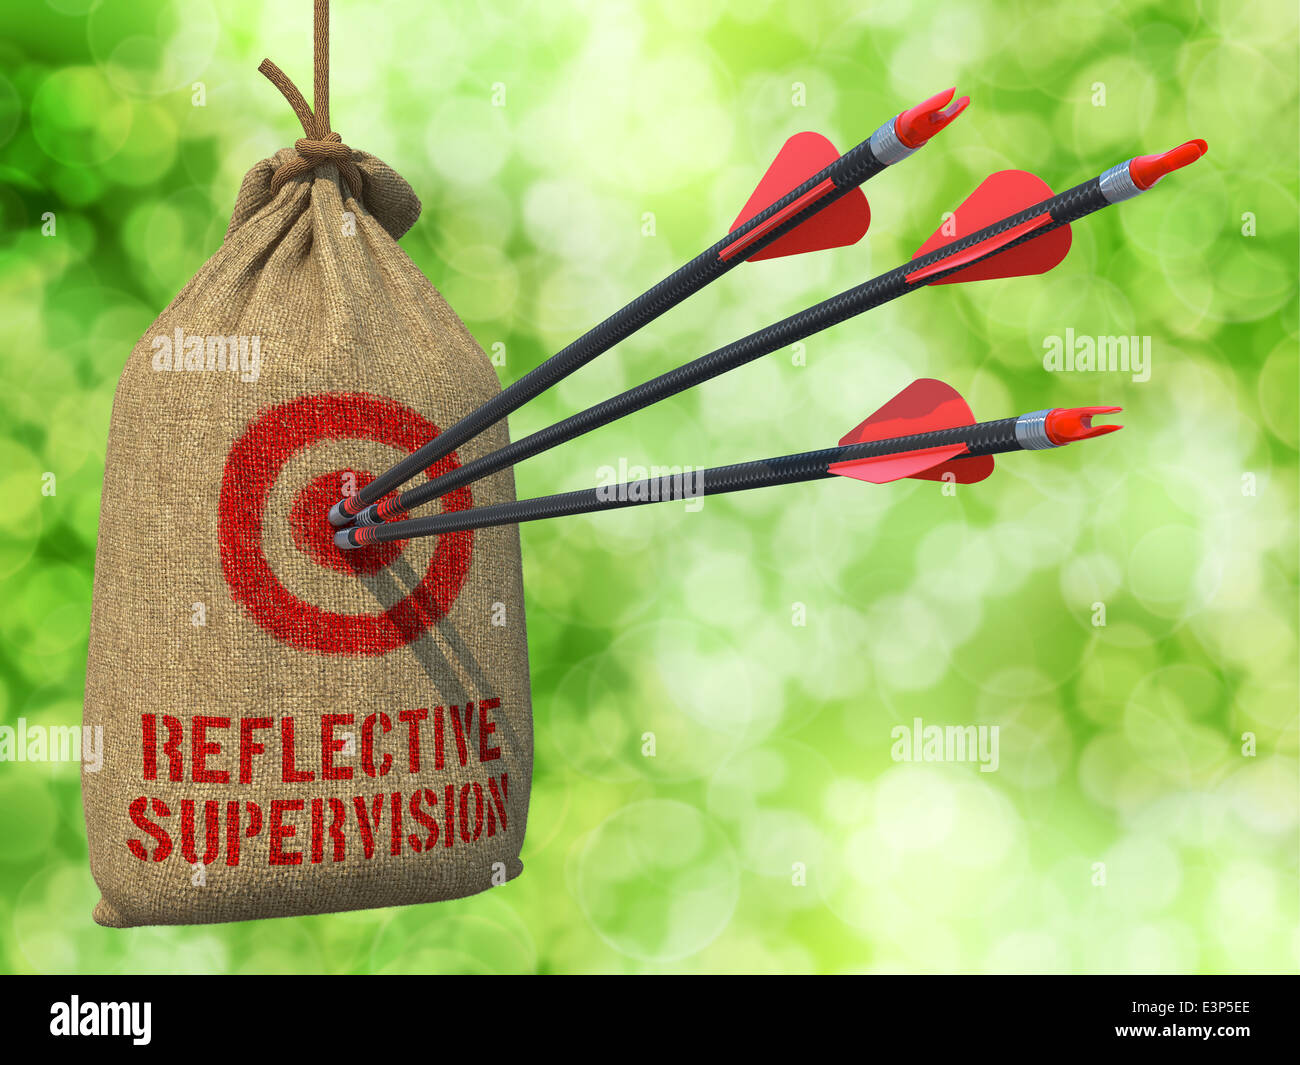 Reflective Supervision - Arrows Hit in Target. Stock Photo